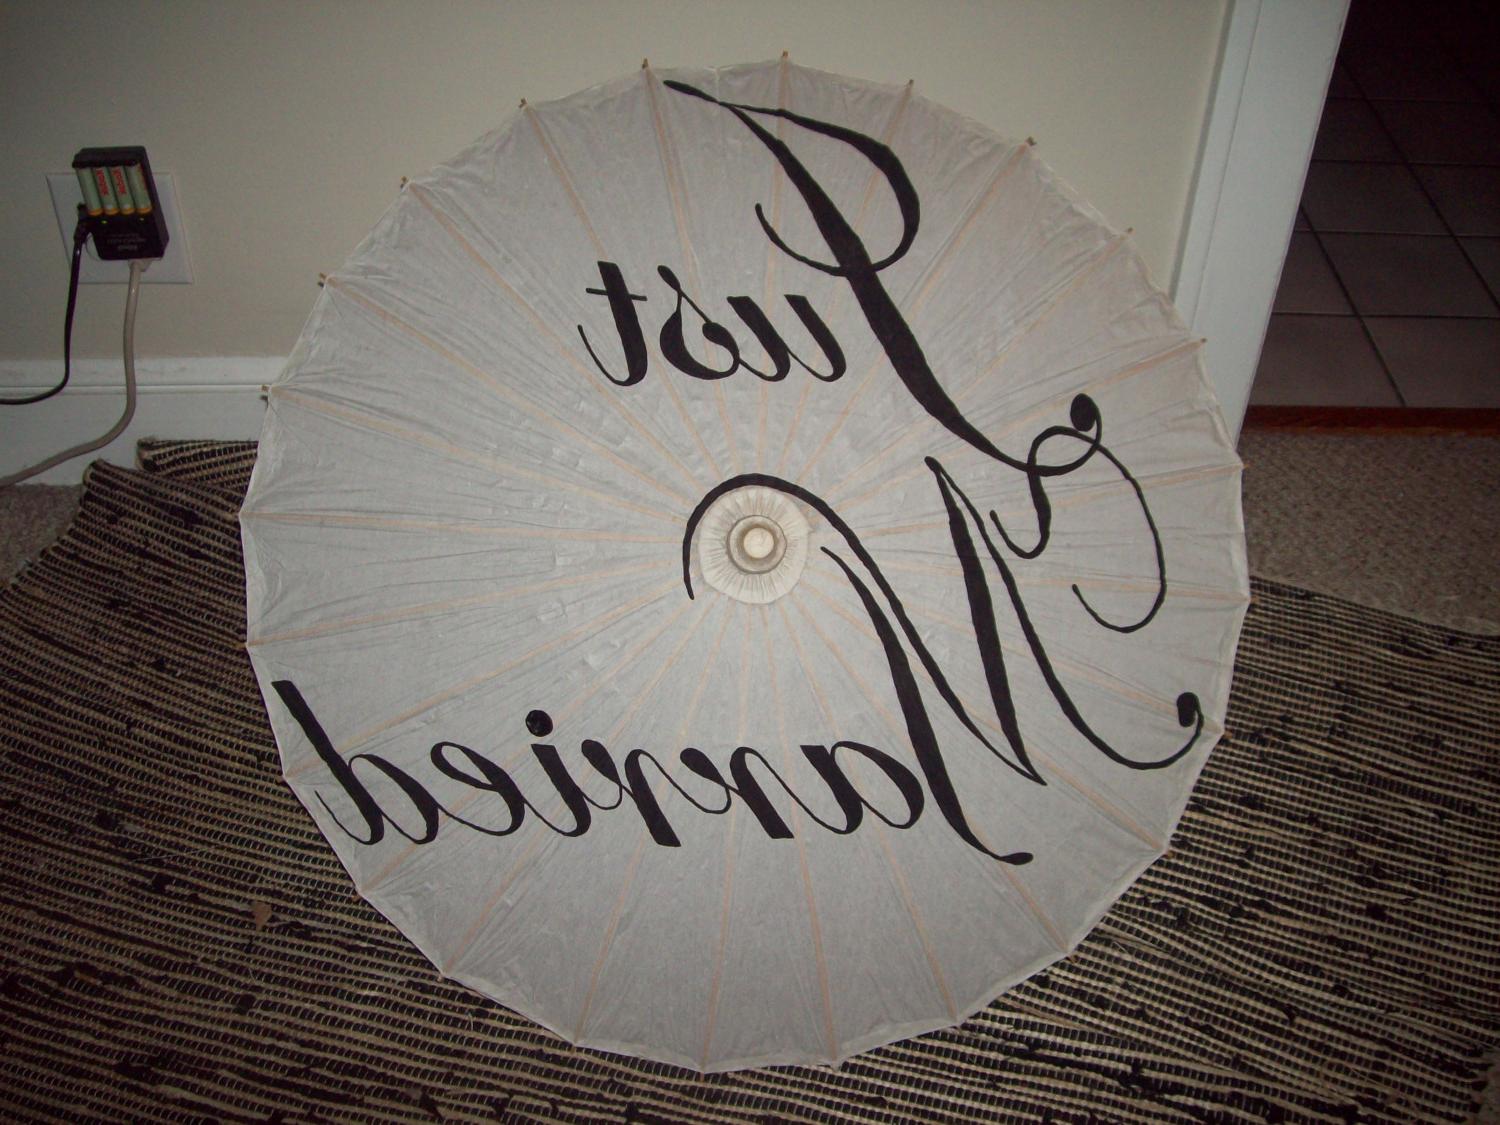 Custom Wedding Parasol - Just Married or Thank You. From RoxysMommy